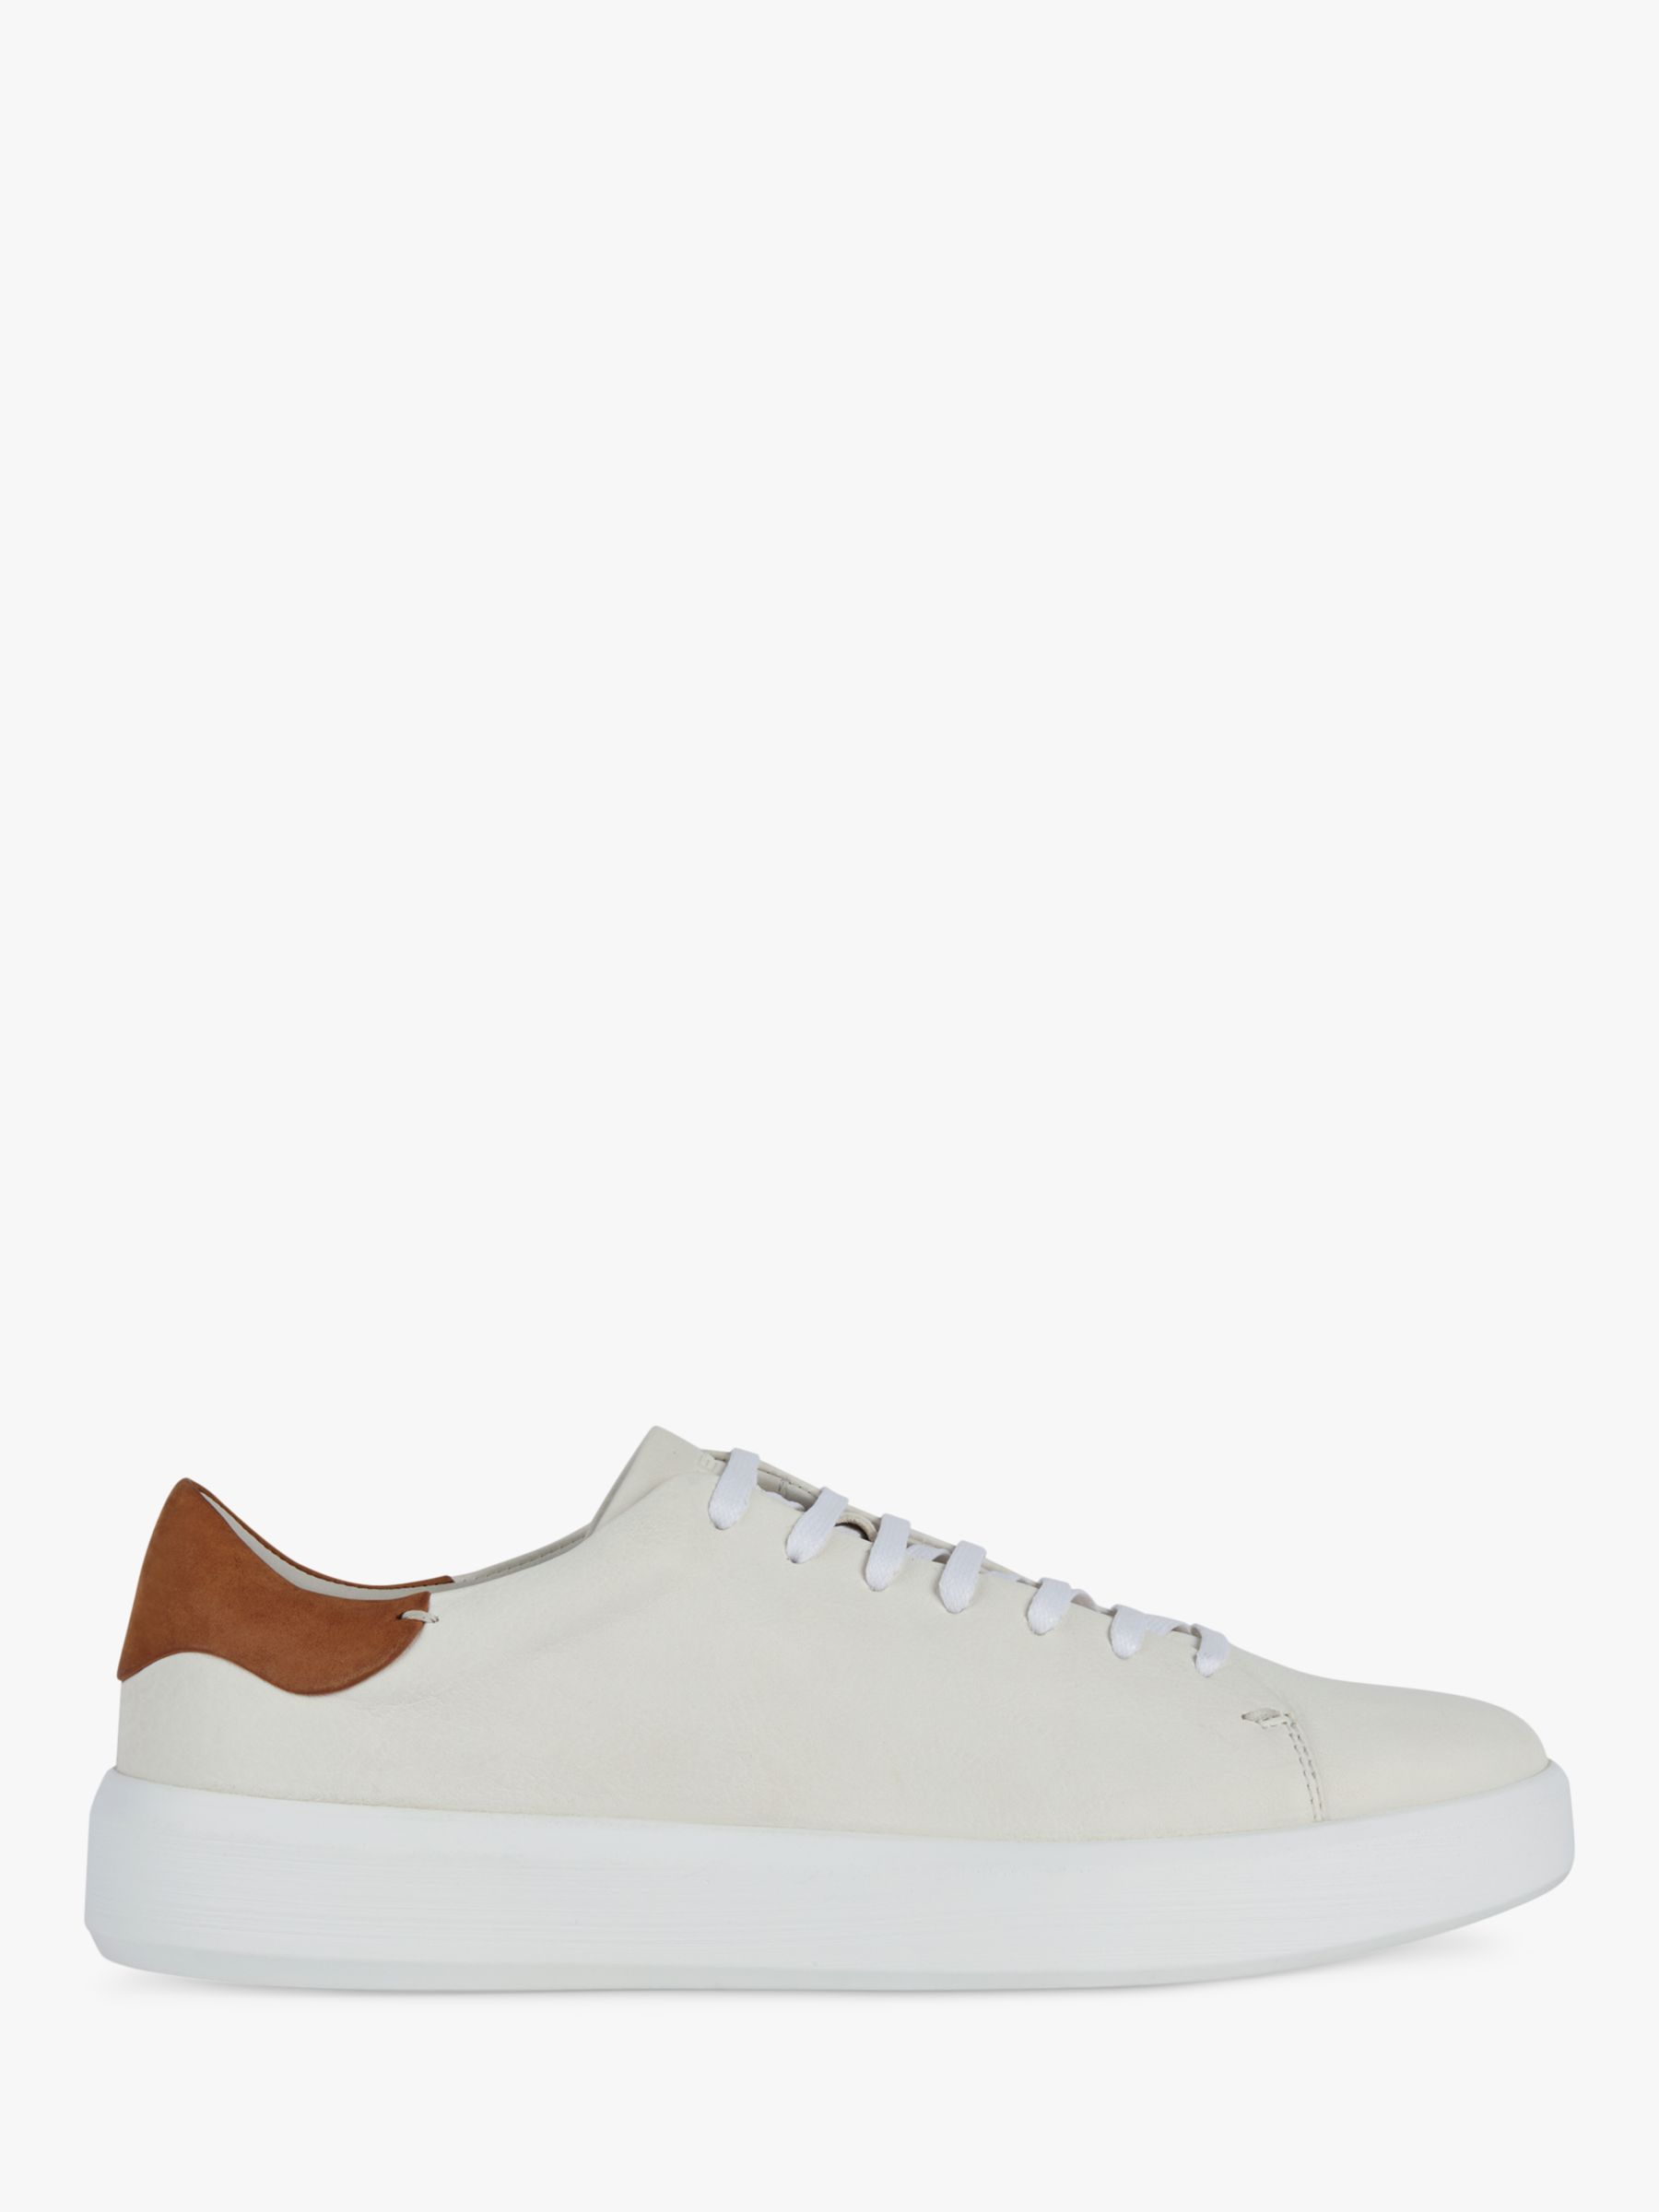 Geox Velletri Low Cut Leather Trainers, White at John Lewis & Partners